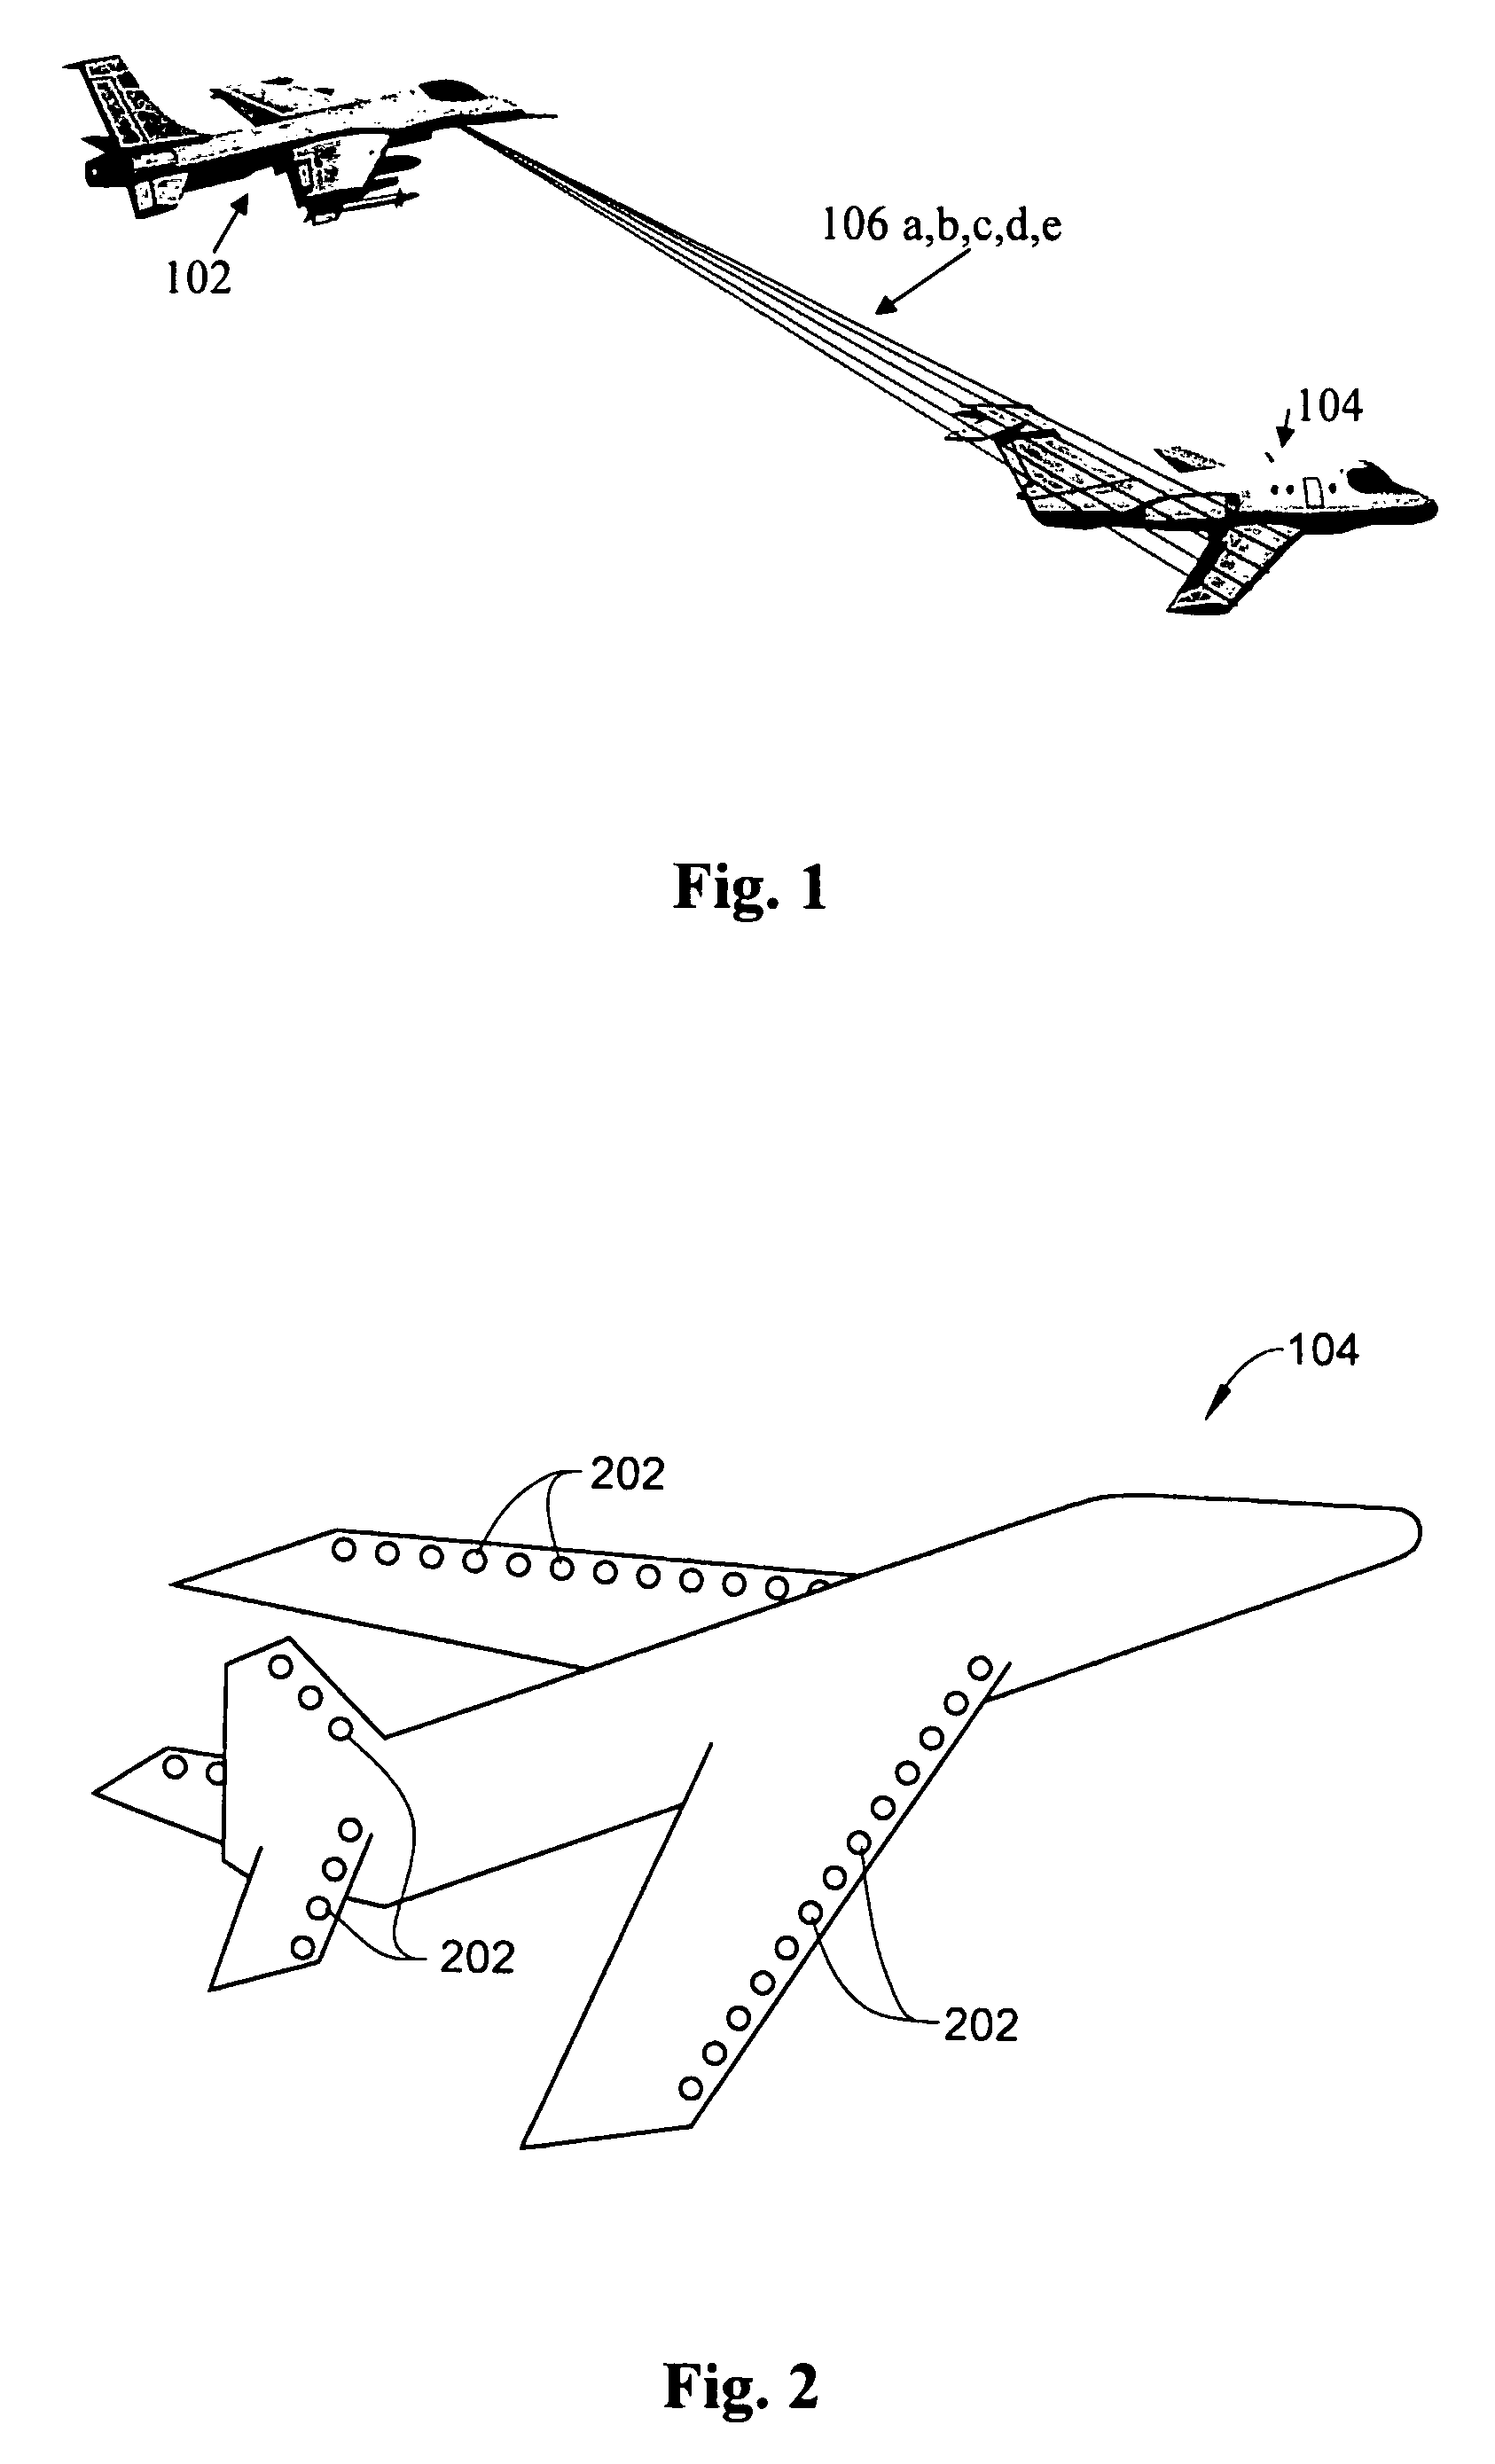 Laser-based flow modification to remotely control air vehicle flight path